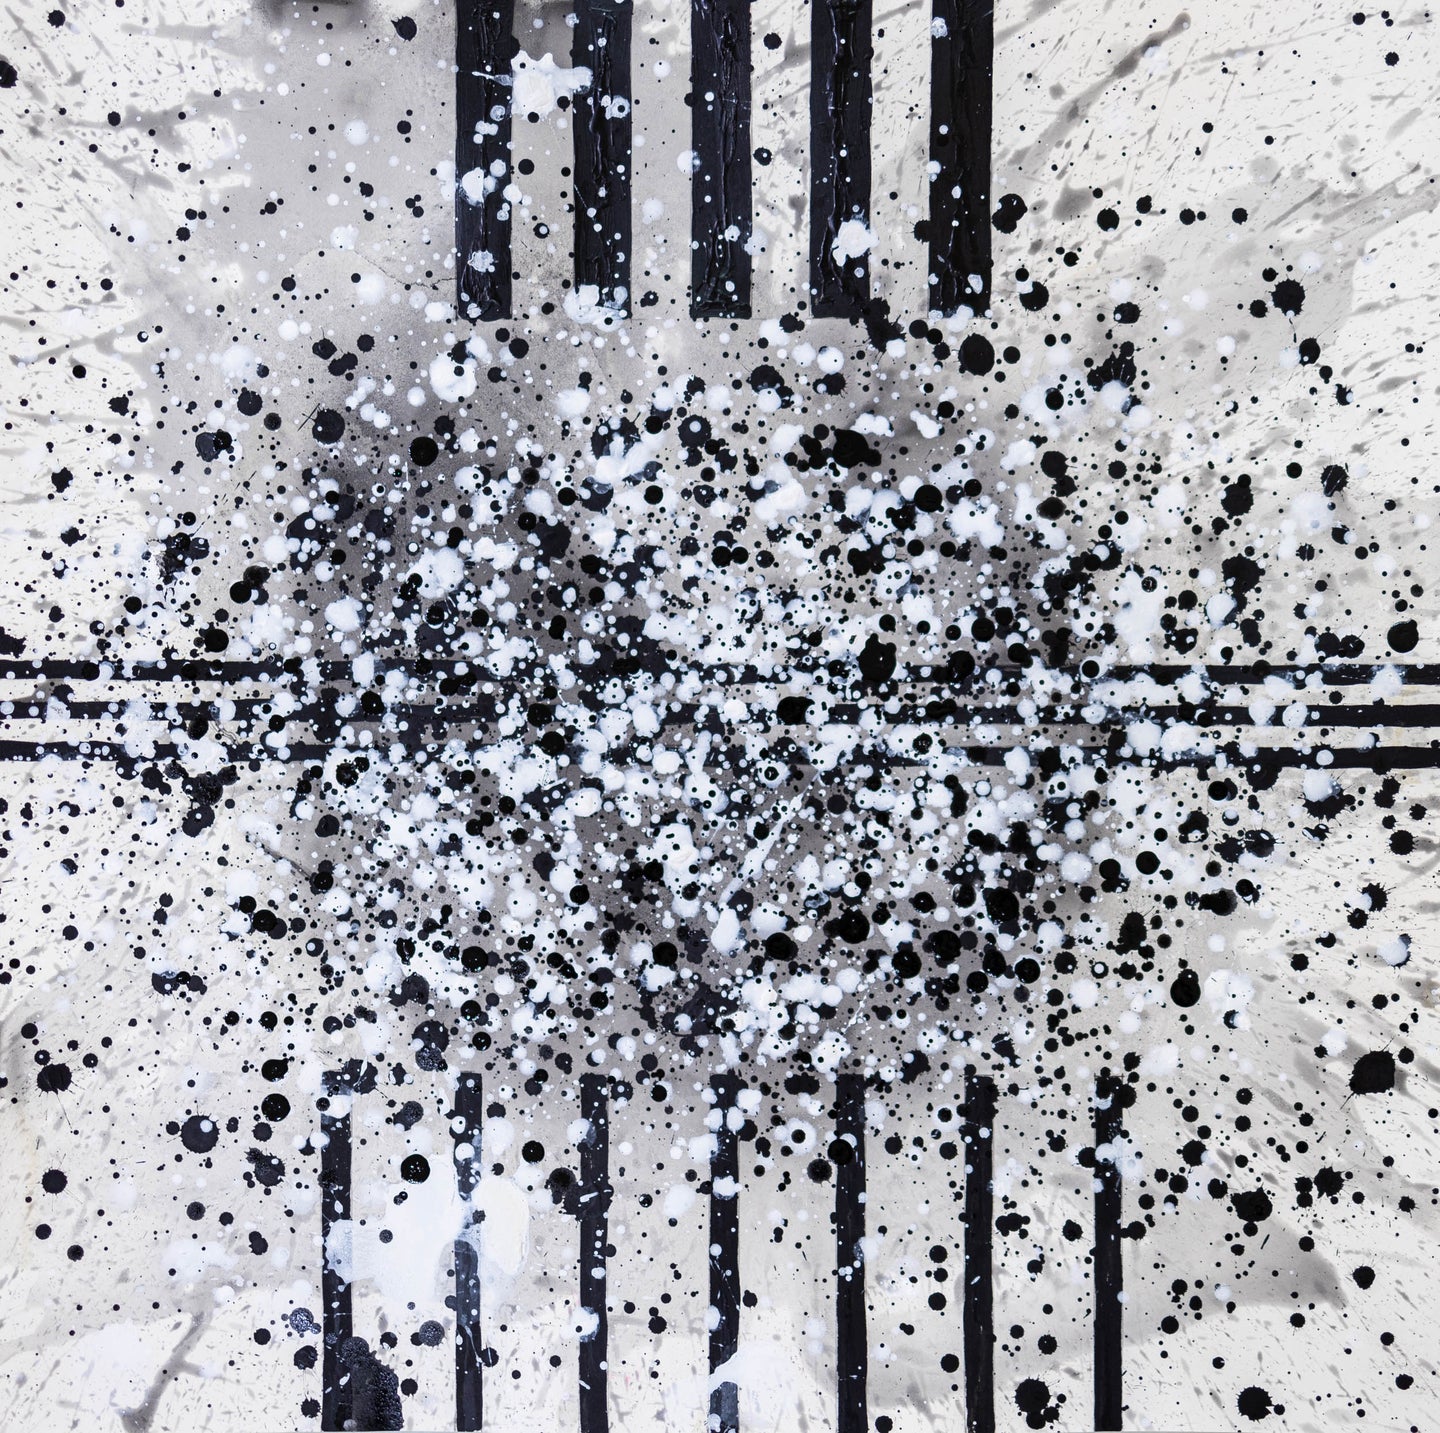 J. Steven Manolis, South Pointe Park (Black & White) 4, 2021, watercolor, acrylic and latex enamel on paper, 18 x 18 inches, black and white abstract art